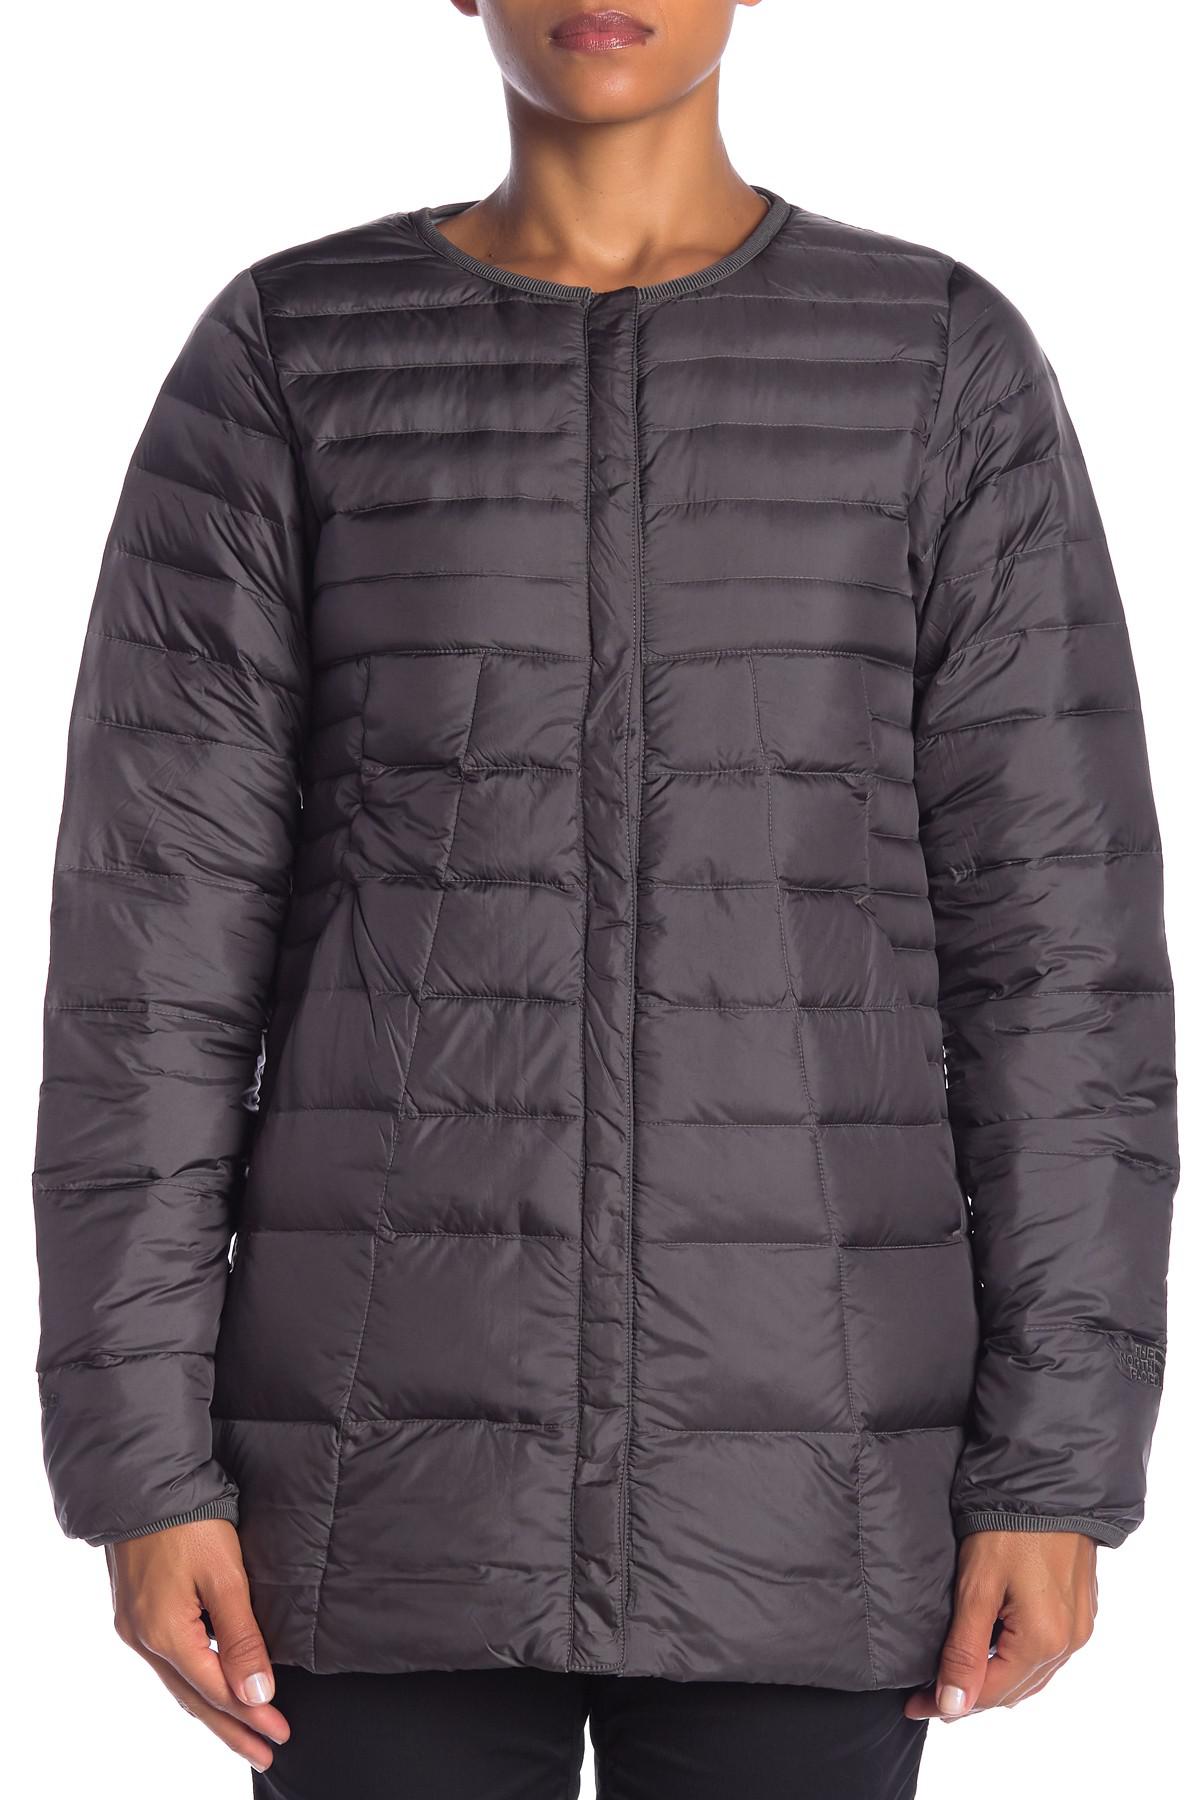 north face mosswood triclimate